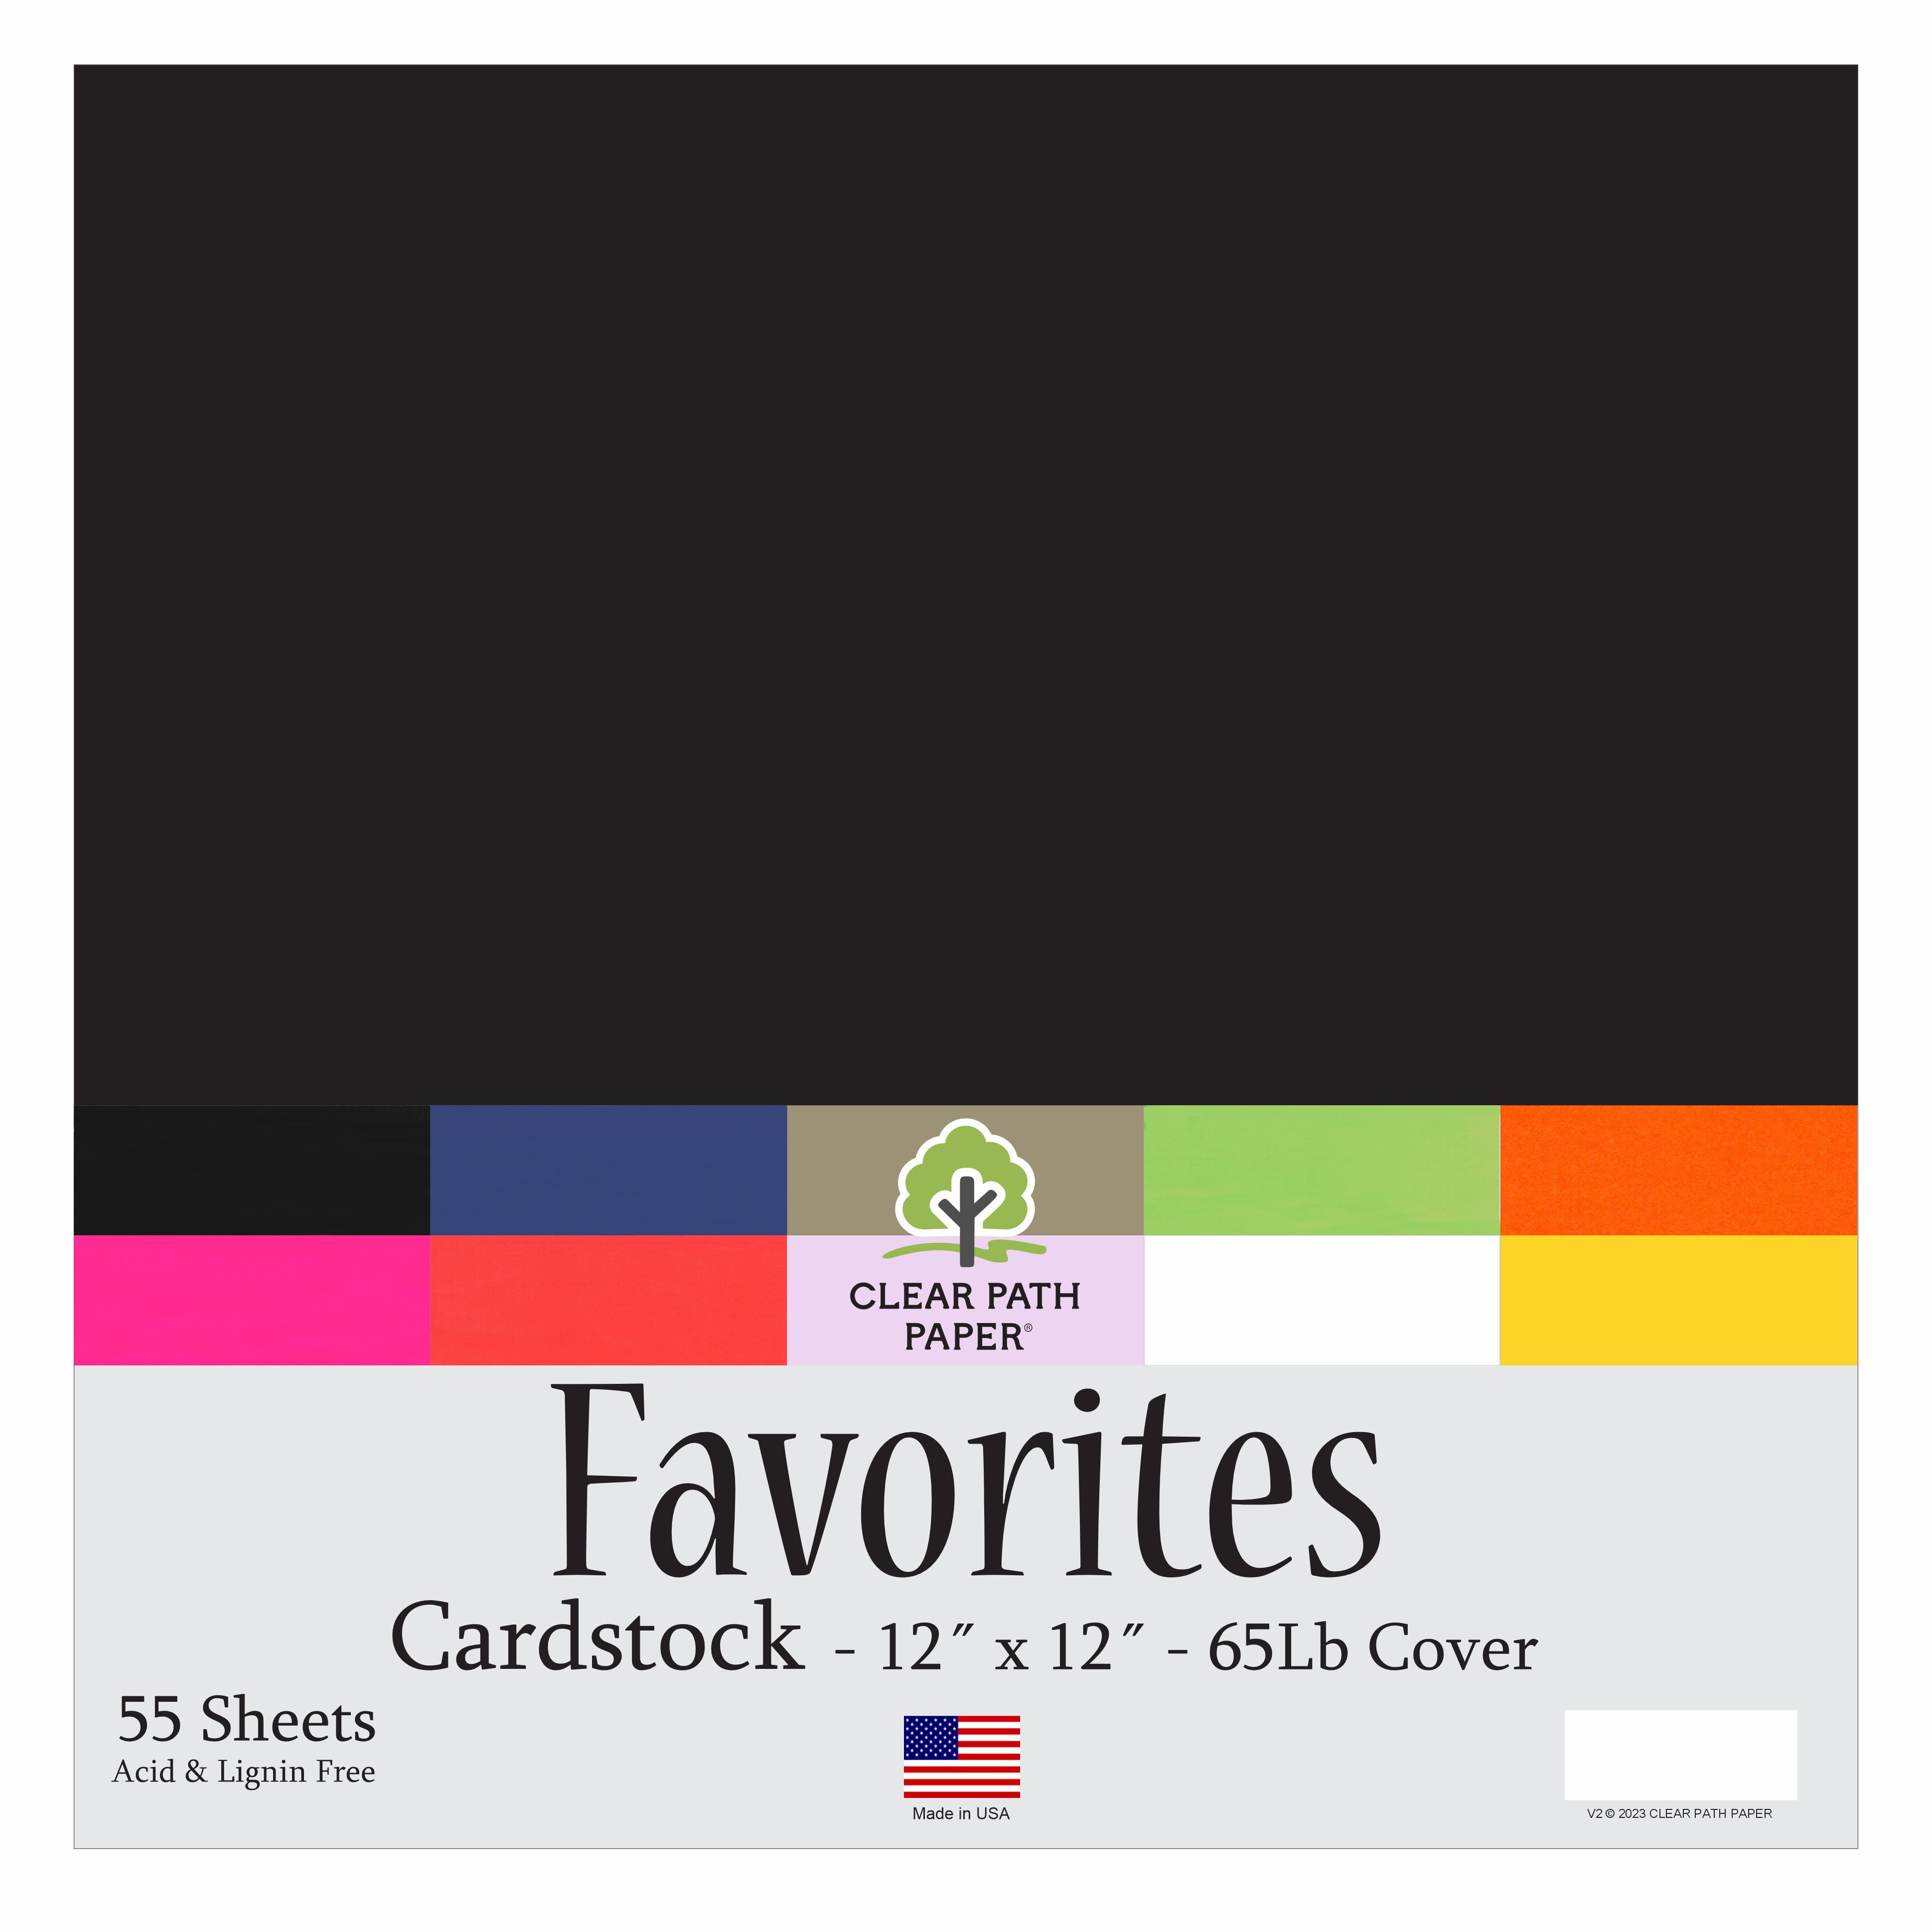 Clear Path Paper Favorites 12 x 12 inch Pink Smooth Cardstock 65lb Cover (50 Sheets)